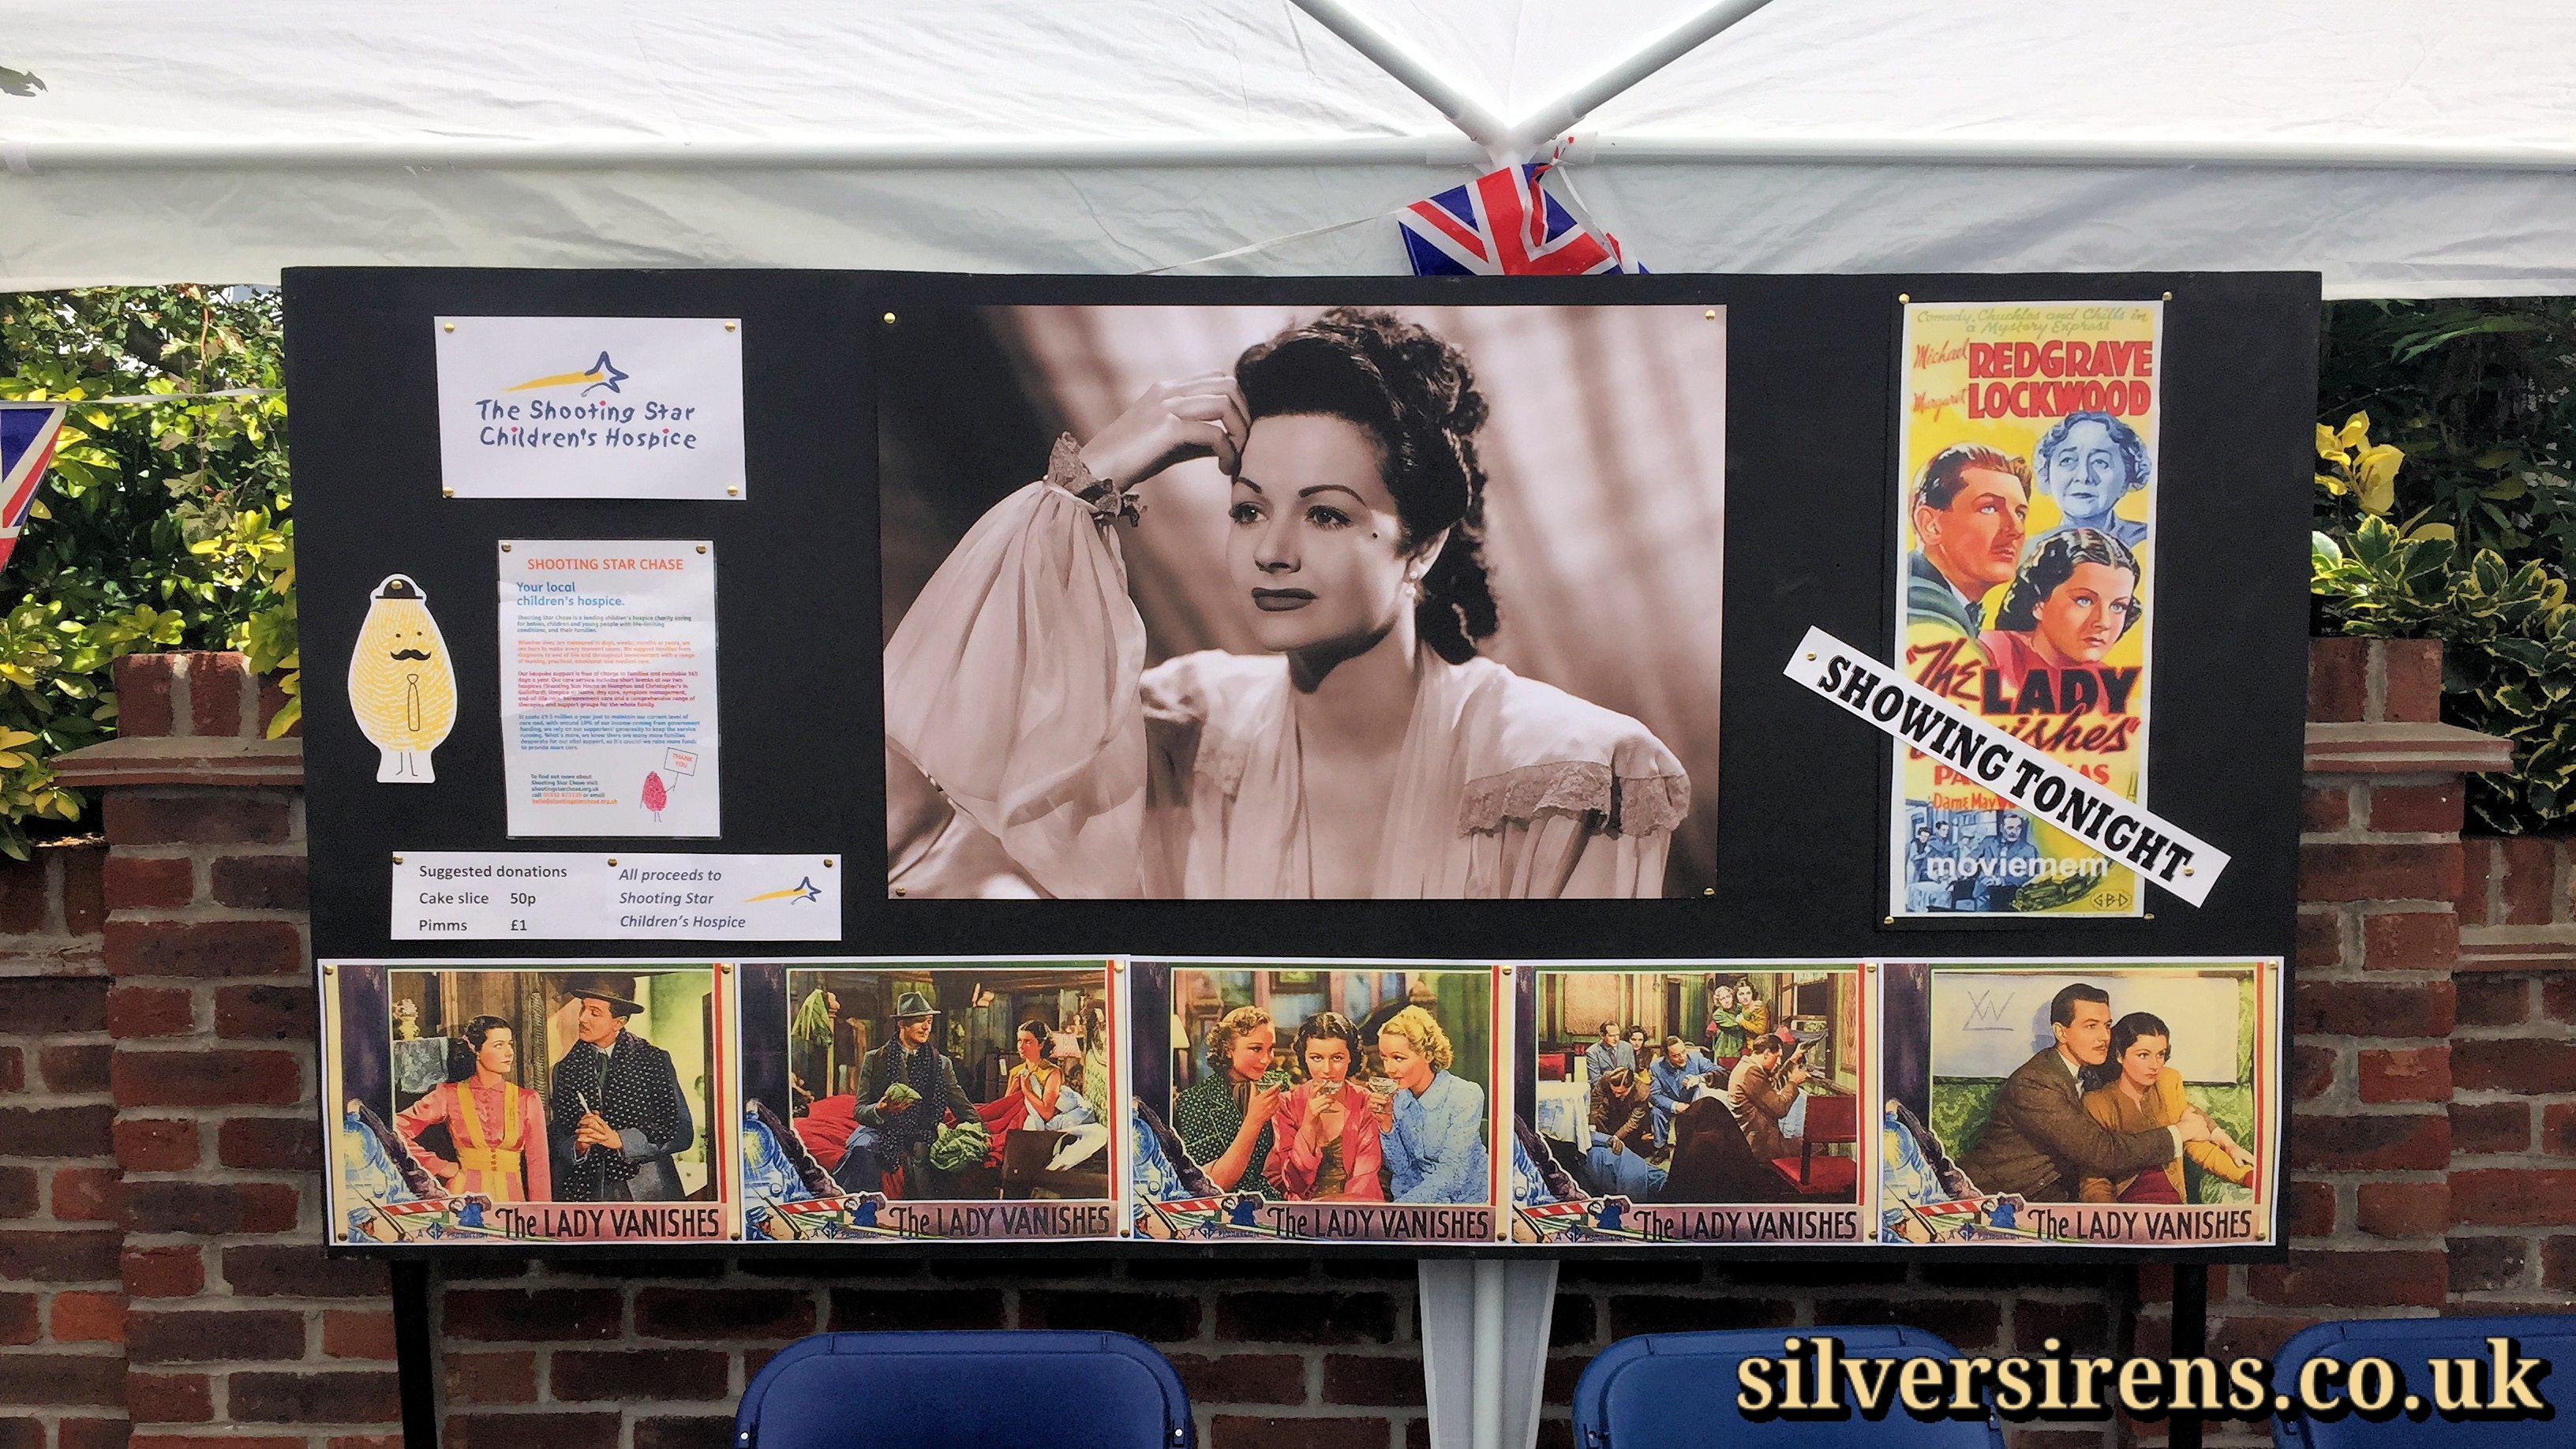 Margaret Lockwood plaque refreshment tent featuring posters for The Lady Vanishes and its screening.  Cake stall taking donations for The Shooting Star Children’s Hospice